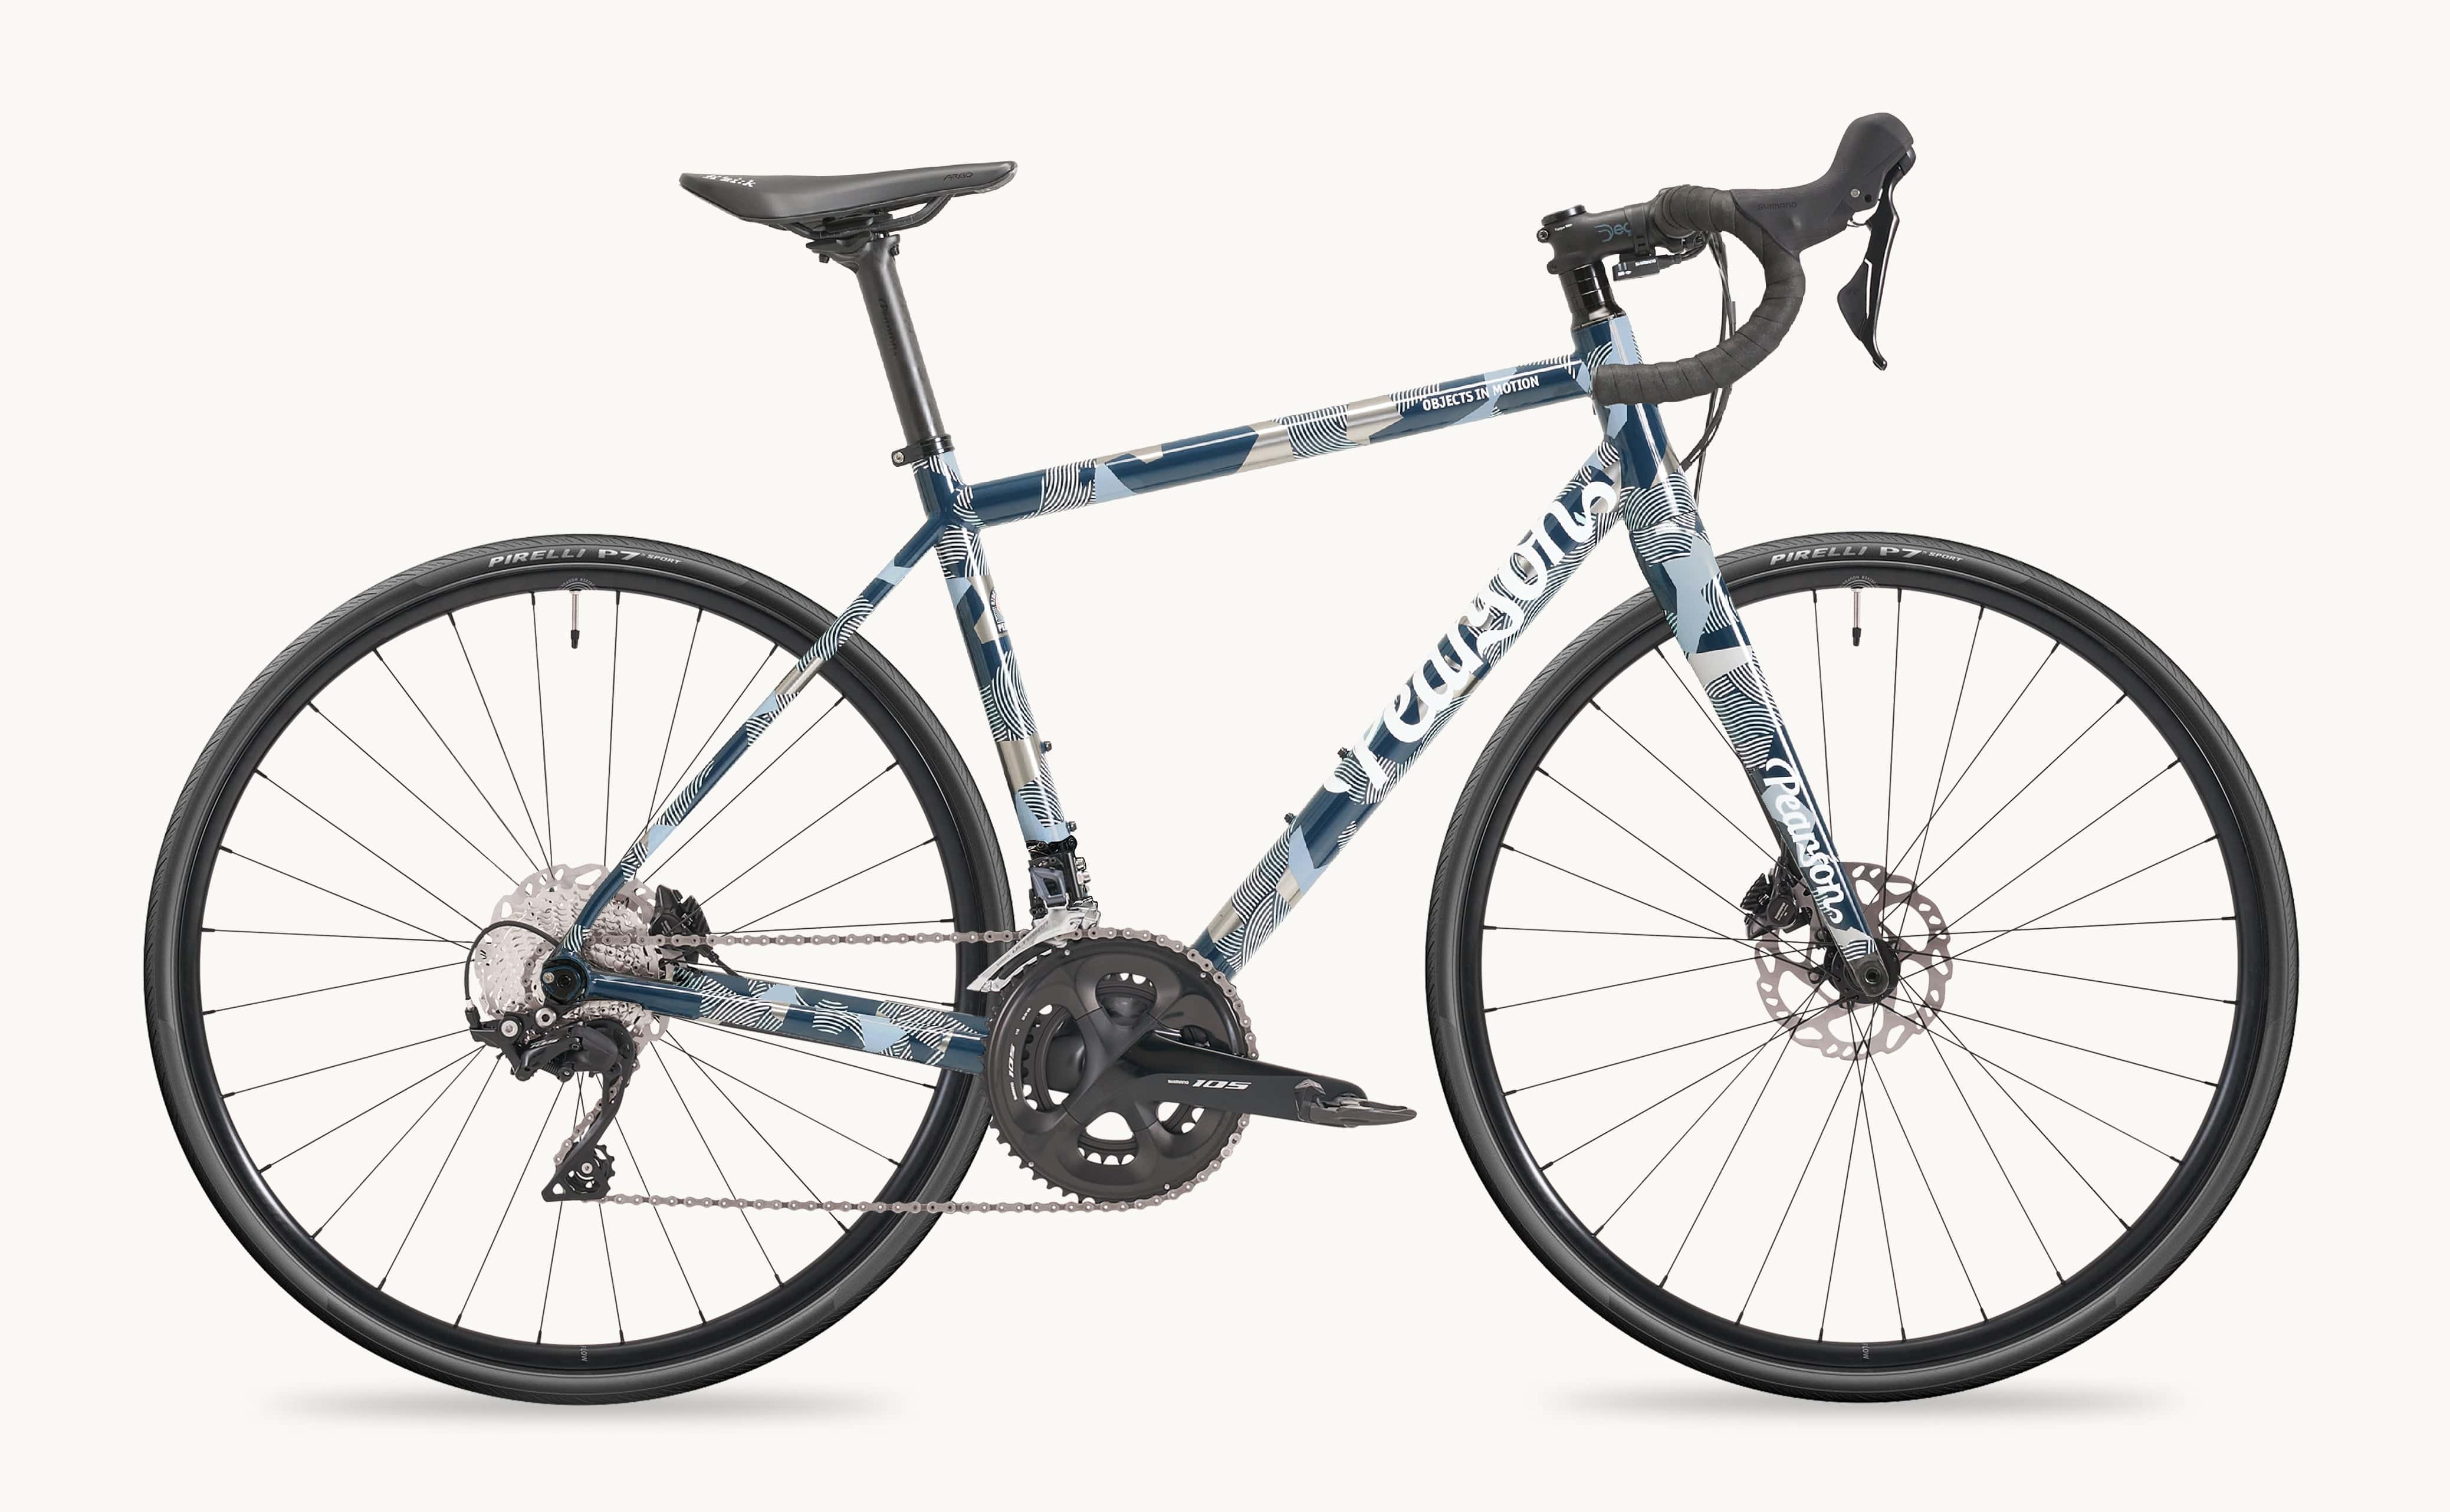 Pcs  Special Offer: Objects In Motion Shimano 105 - Titanium Road Bike  Small / Blue Camo / Shimano 105 Mechanical - Pearson Ebb And Flow Alloy Wheels